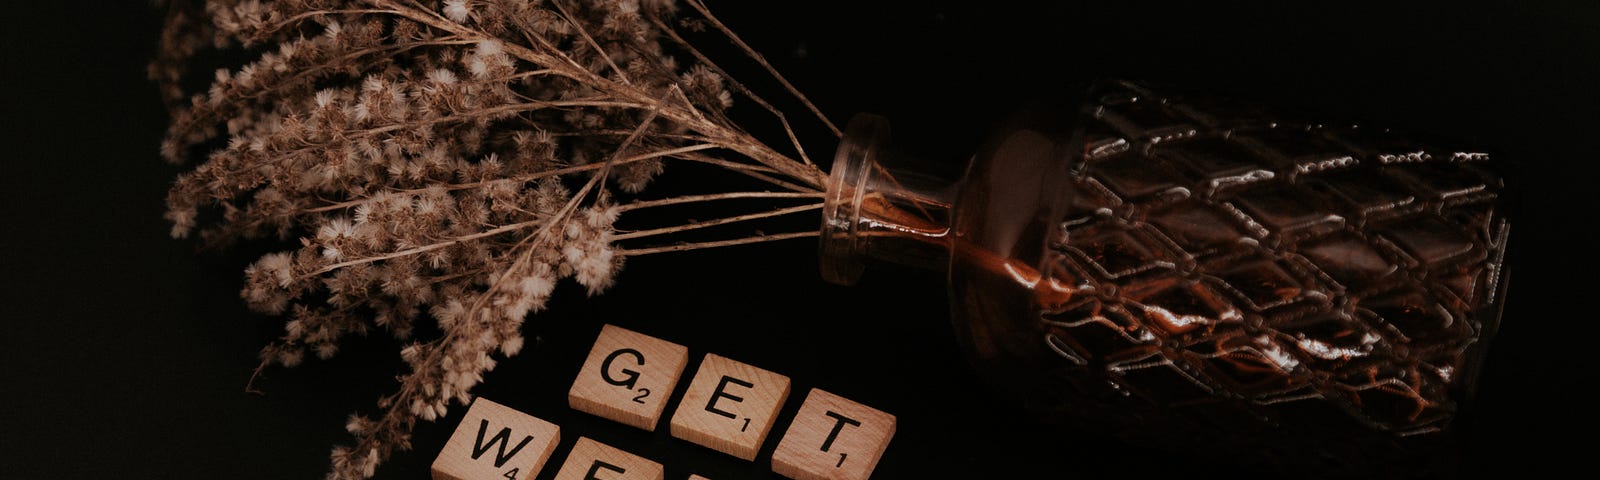 A bundle of dried flowers in a glass vase laying on its side. The words ‘Get Well Soon’ are laid out in Scrabble tiles beside it, on a black background.